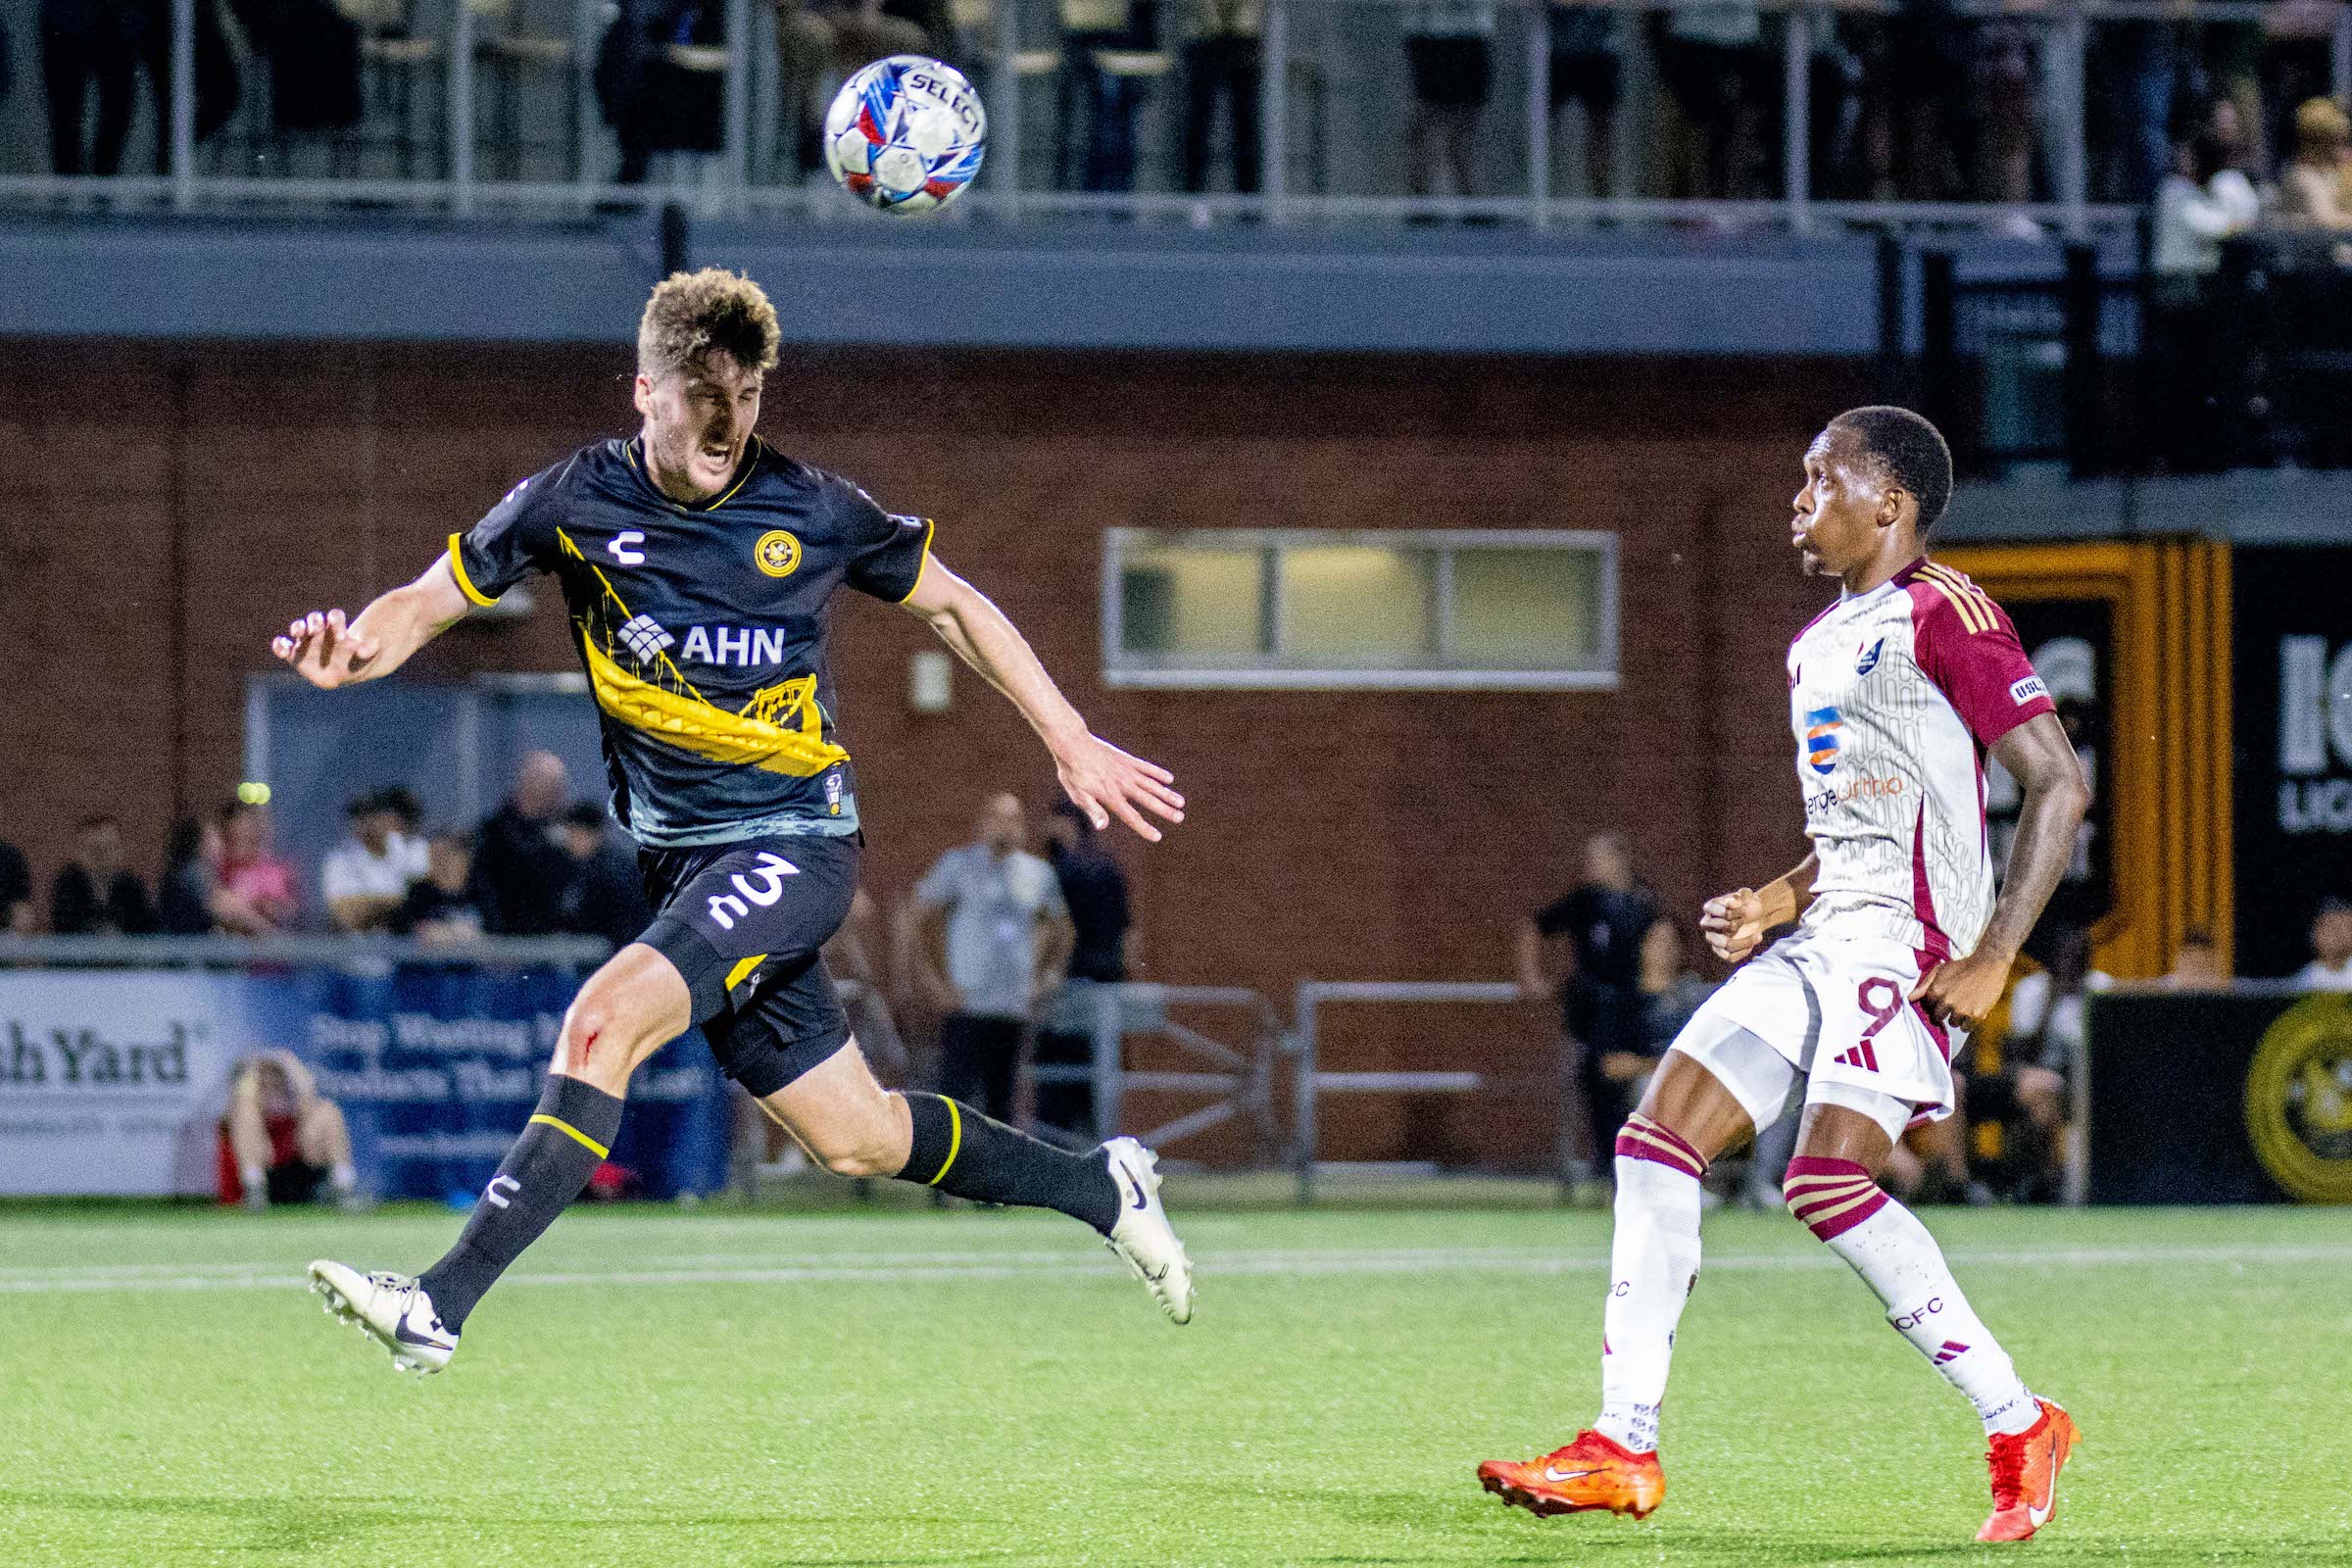 Lead slips away in draw with N.C. – Pittsburgh Riverhounds SC